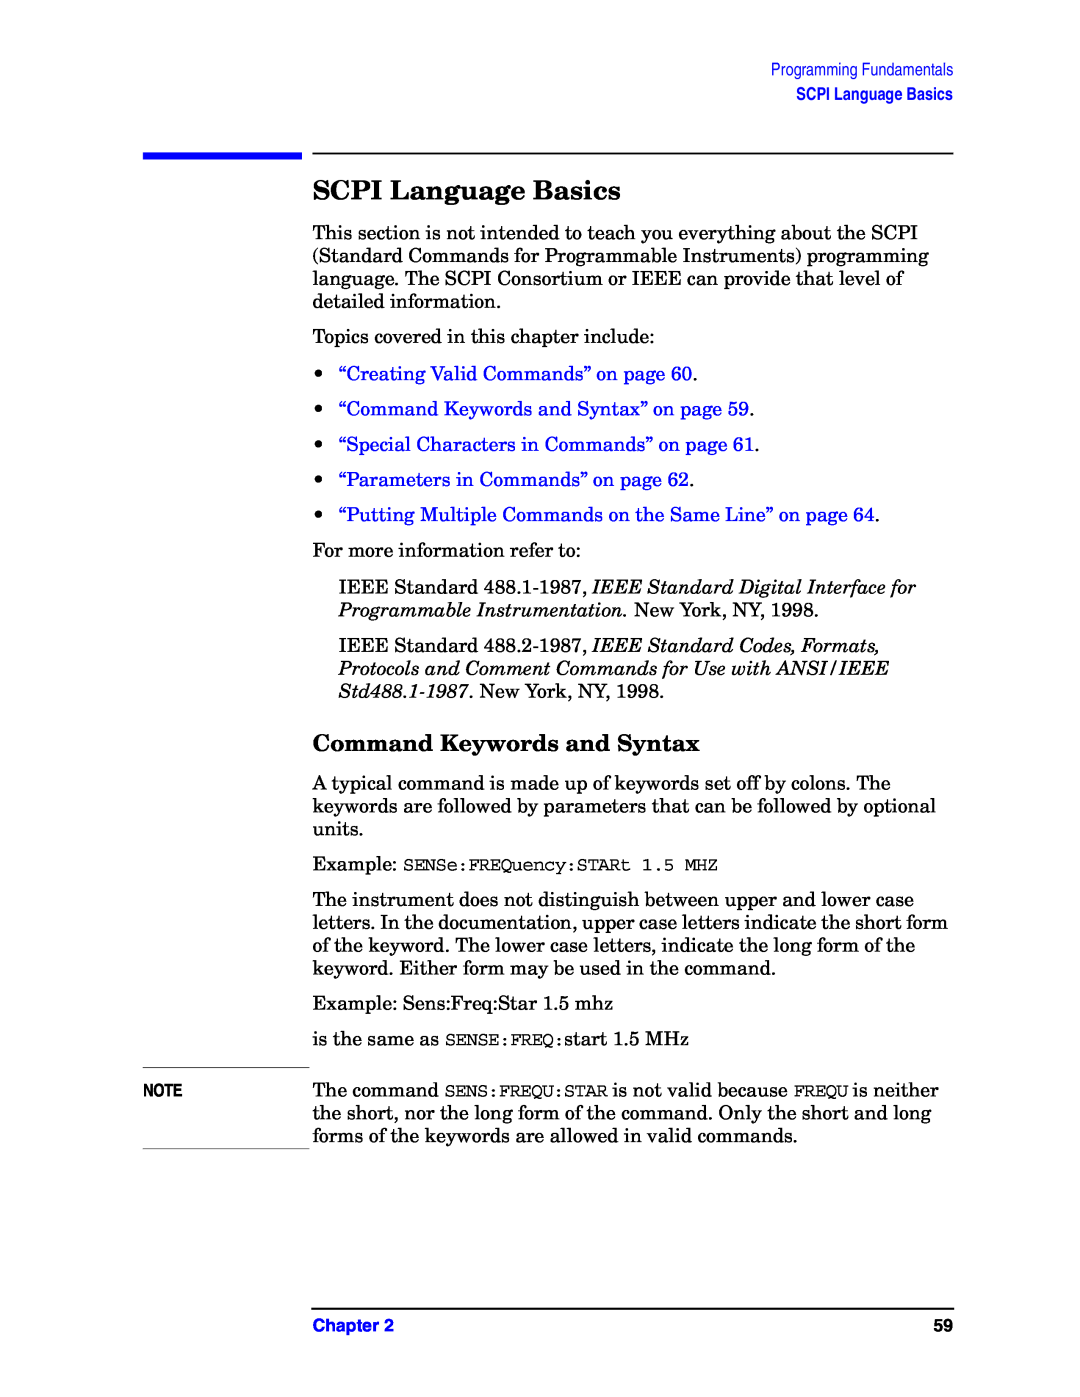 Agilent Technologies E4406A VSA SCPI Language Basics, Command Keywords and Syntax, •“Creating Valid Commands” on page 